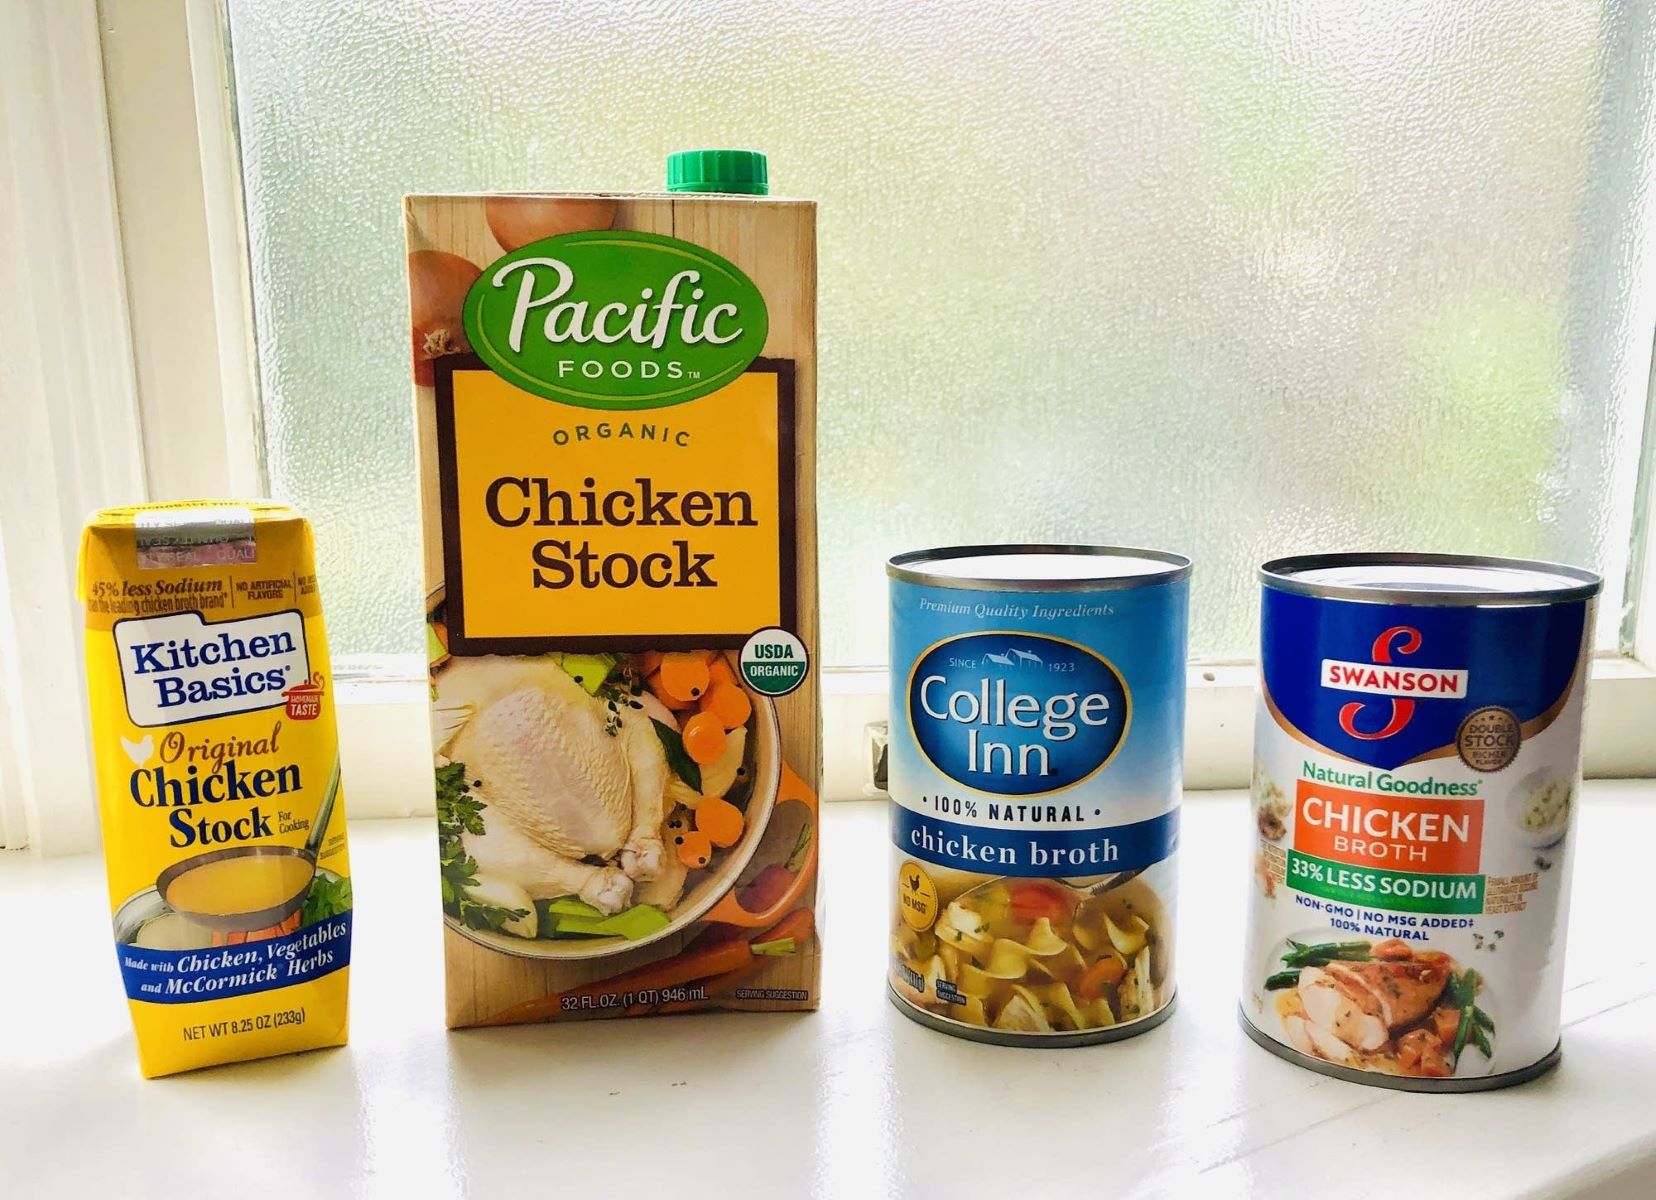 Discover The Surprising Number Of Cups In A 14.5 Ounce Can Of Chicken Broth!